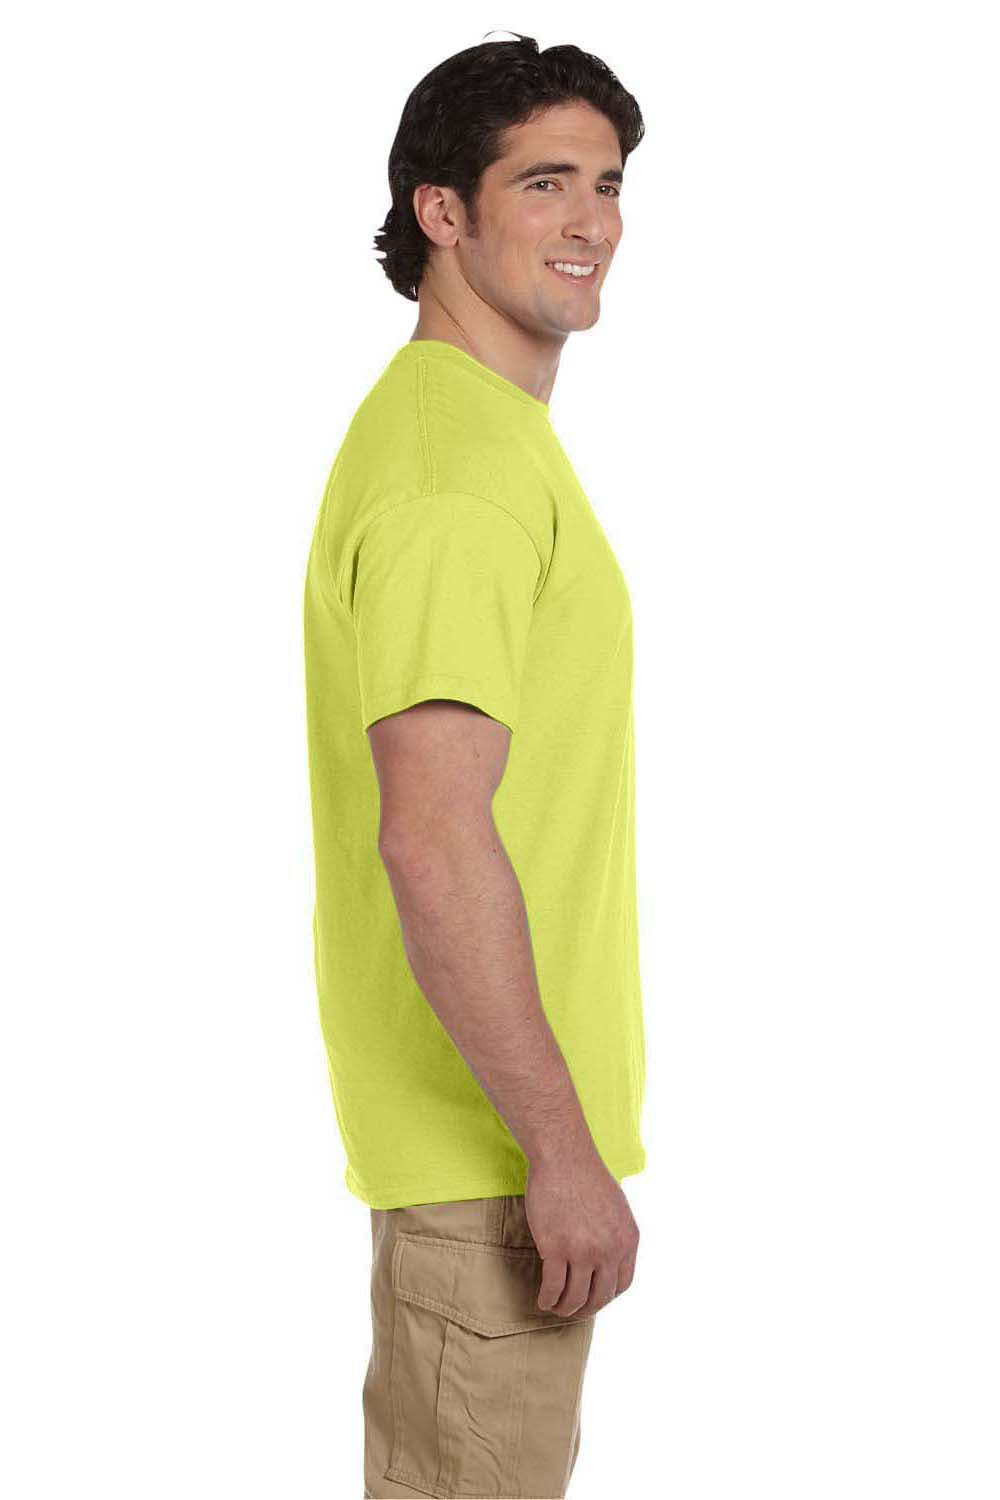 Fruit Of The Loom 3931 Mens HD Jersey Short Sleeve Crewneck T-Shirt Neon Yellow Side